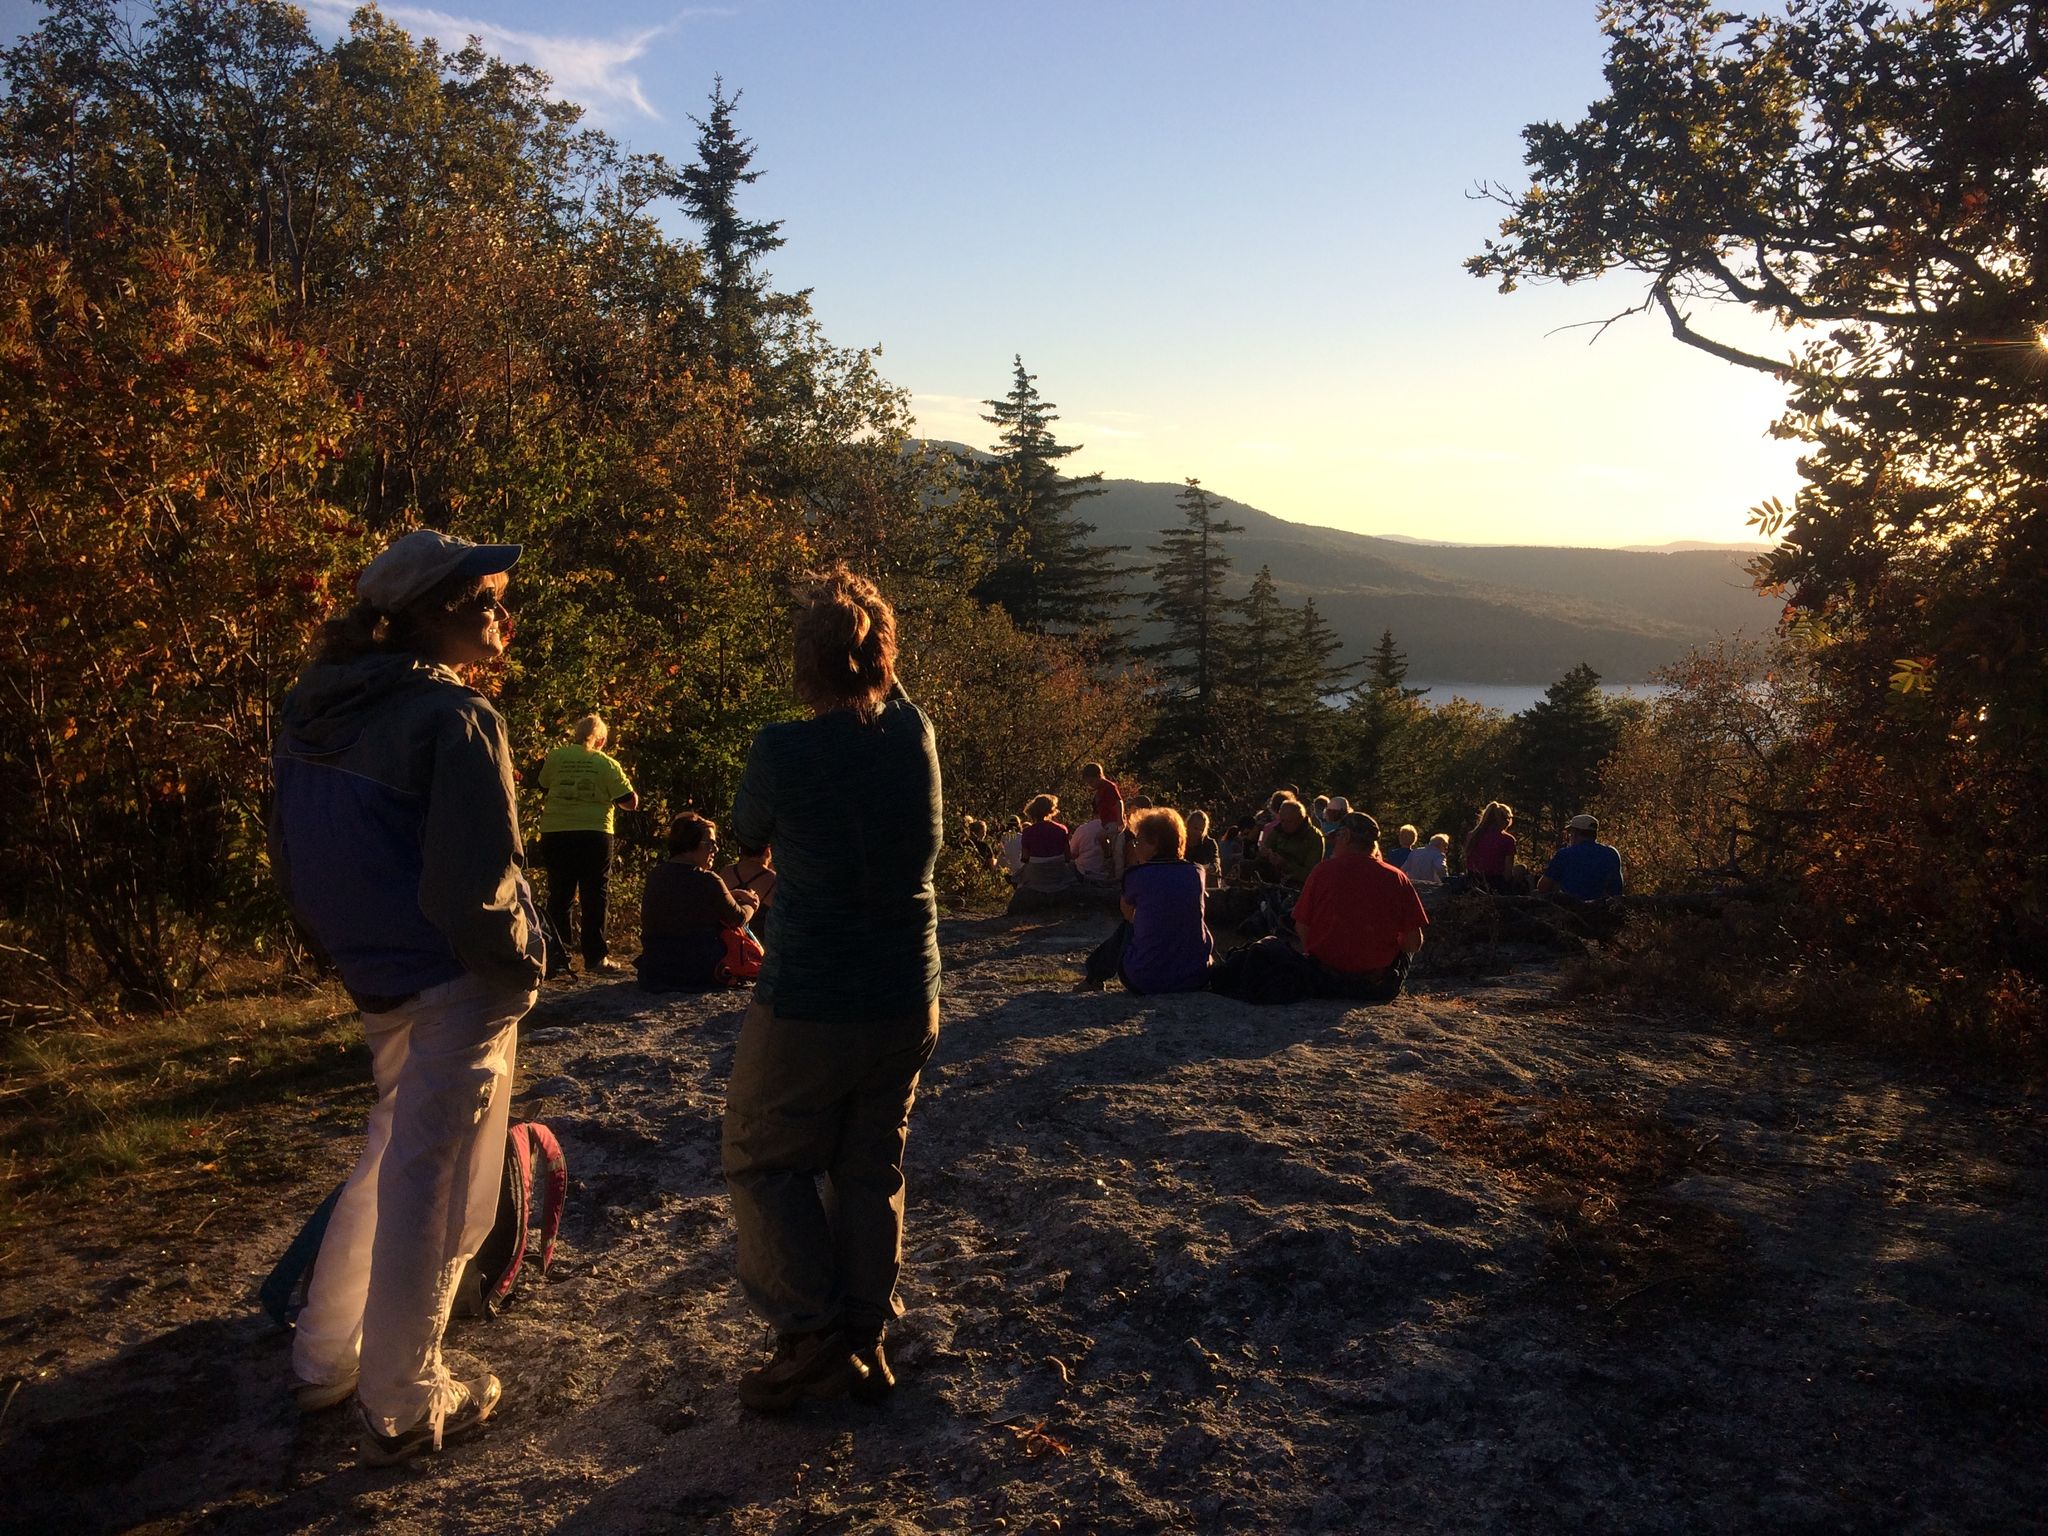 A group gathers at sunset on Sunset Hill overlooking the lake.